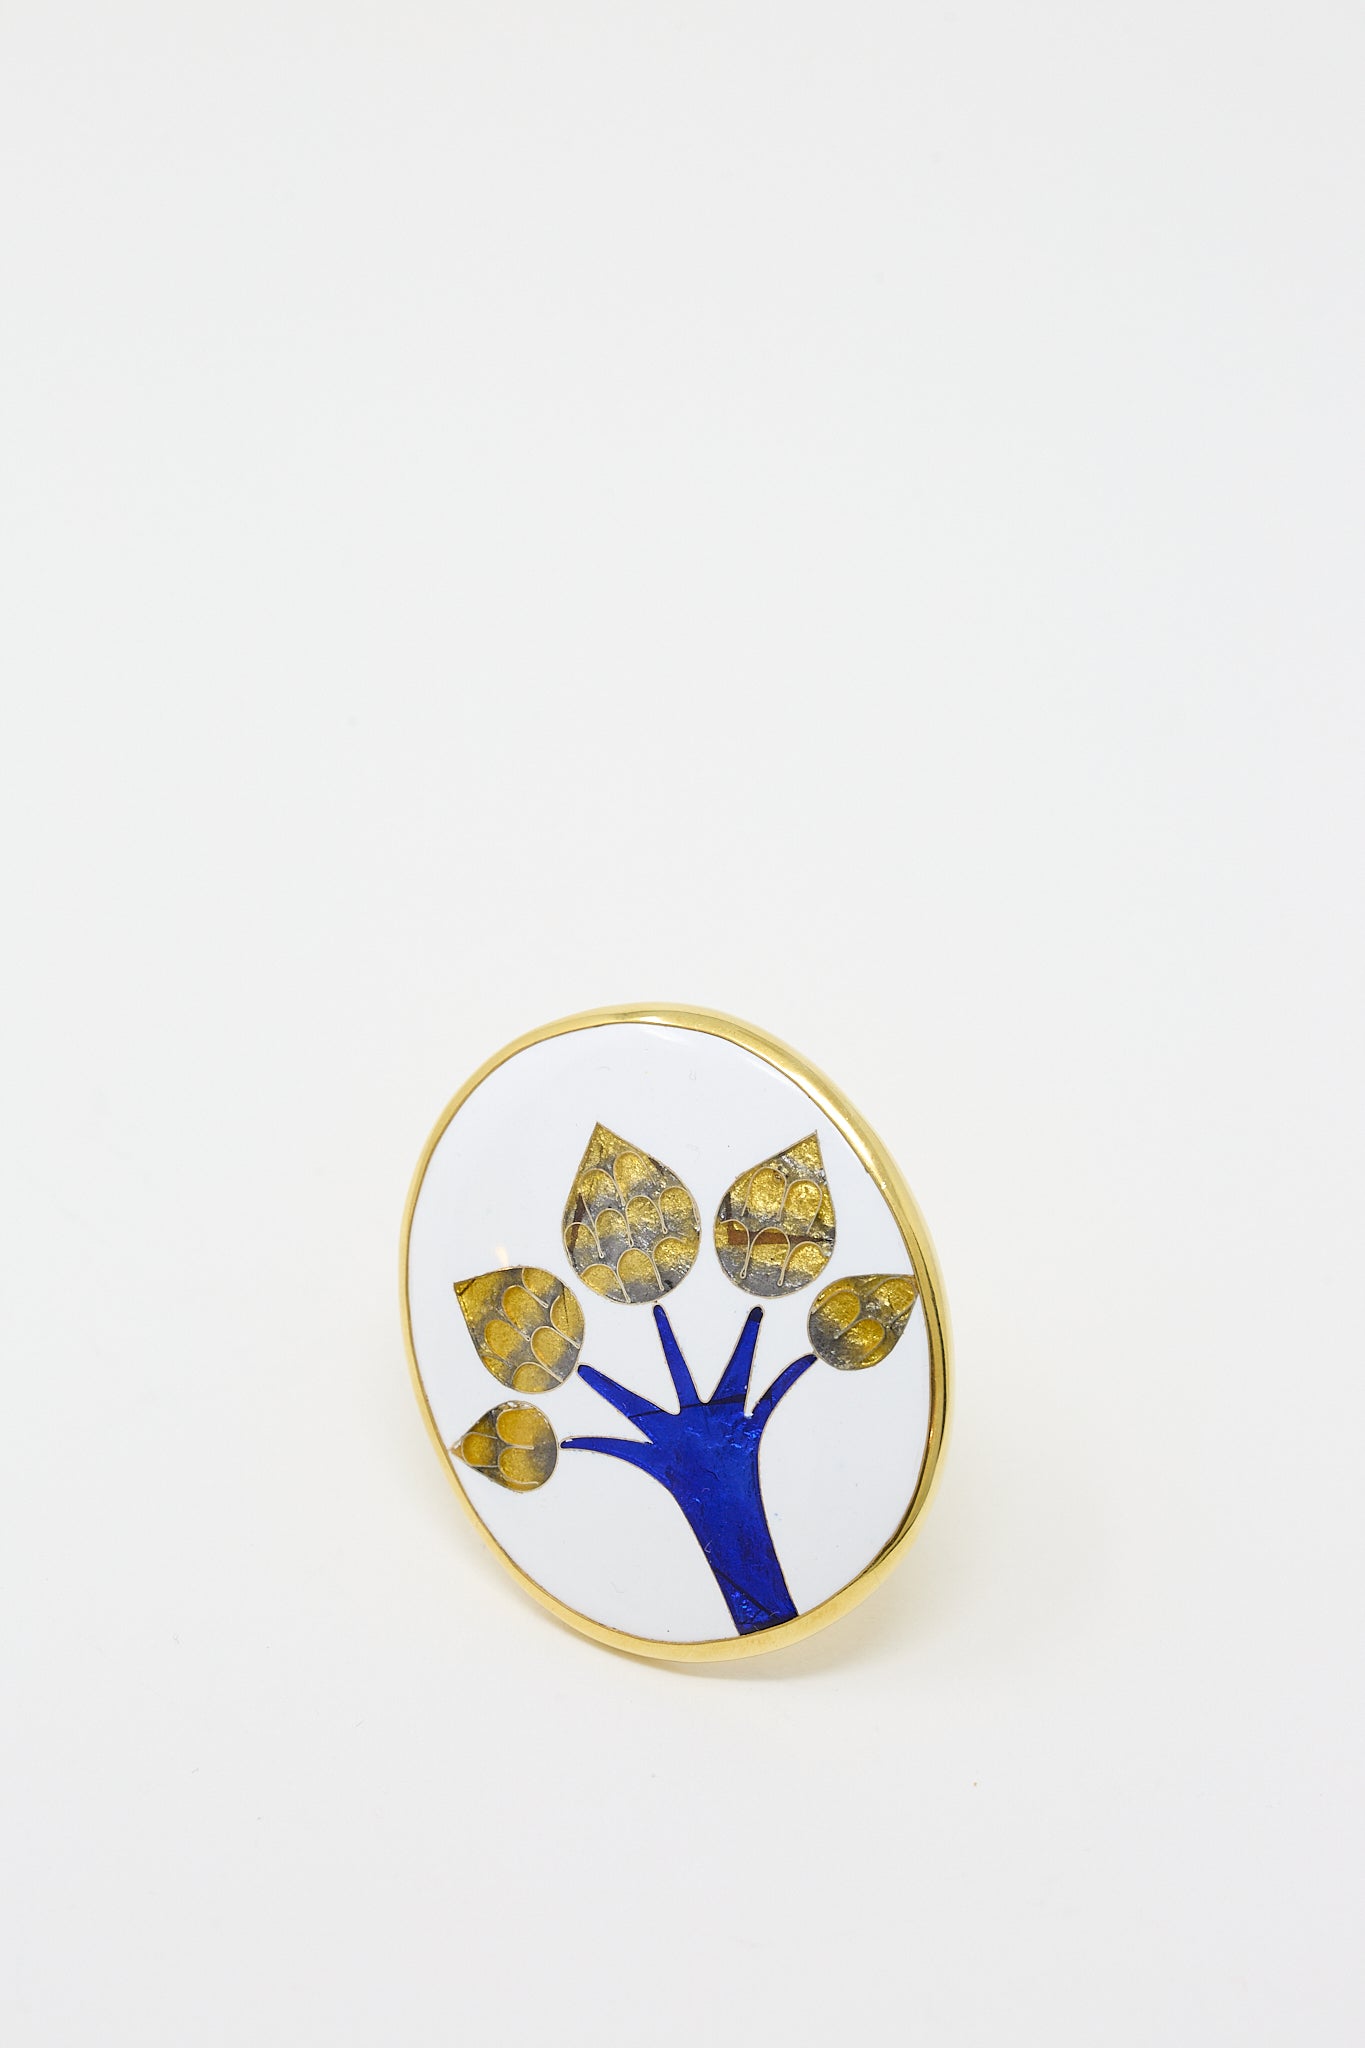 A circular brooch with a gold-colored rim featuring a blue tree design and yellow accents against a white background, inspired by the Byzantine cloisonné technique, from Sofio Gongli's Ring in Tree collection.